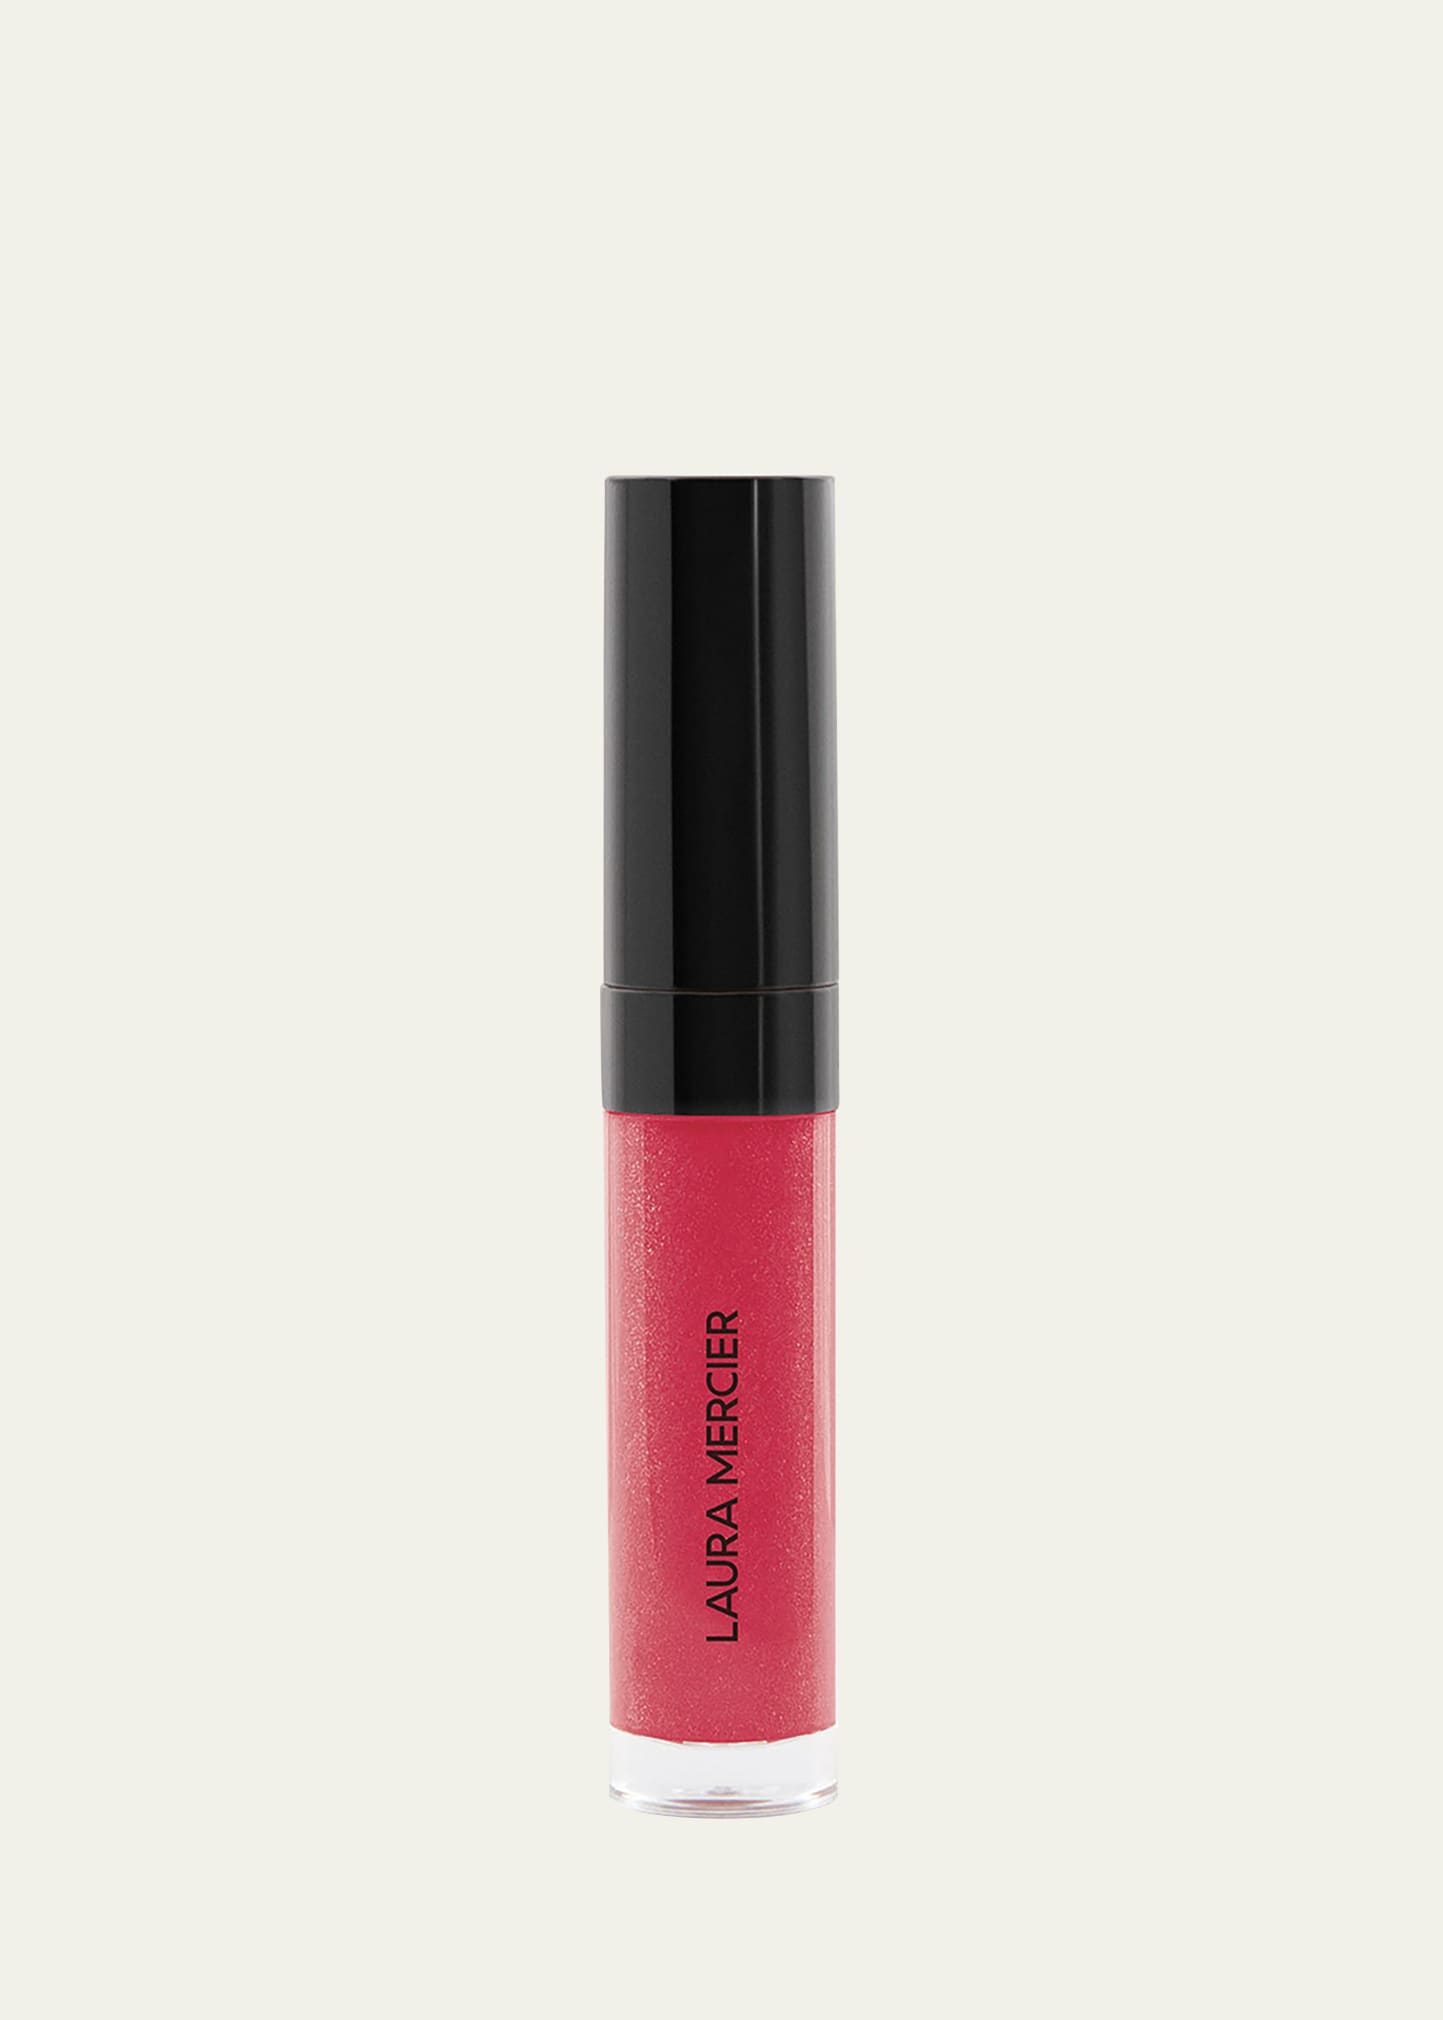 Laura Mercier Lip Glace In Rose Syrup